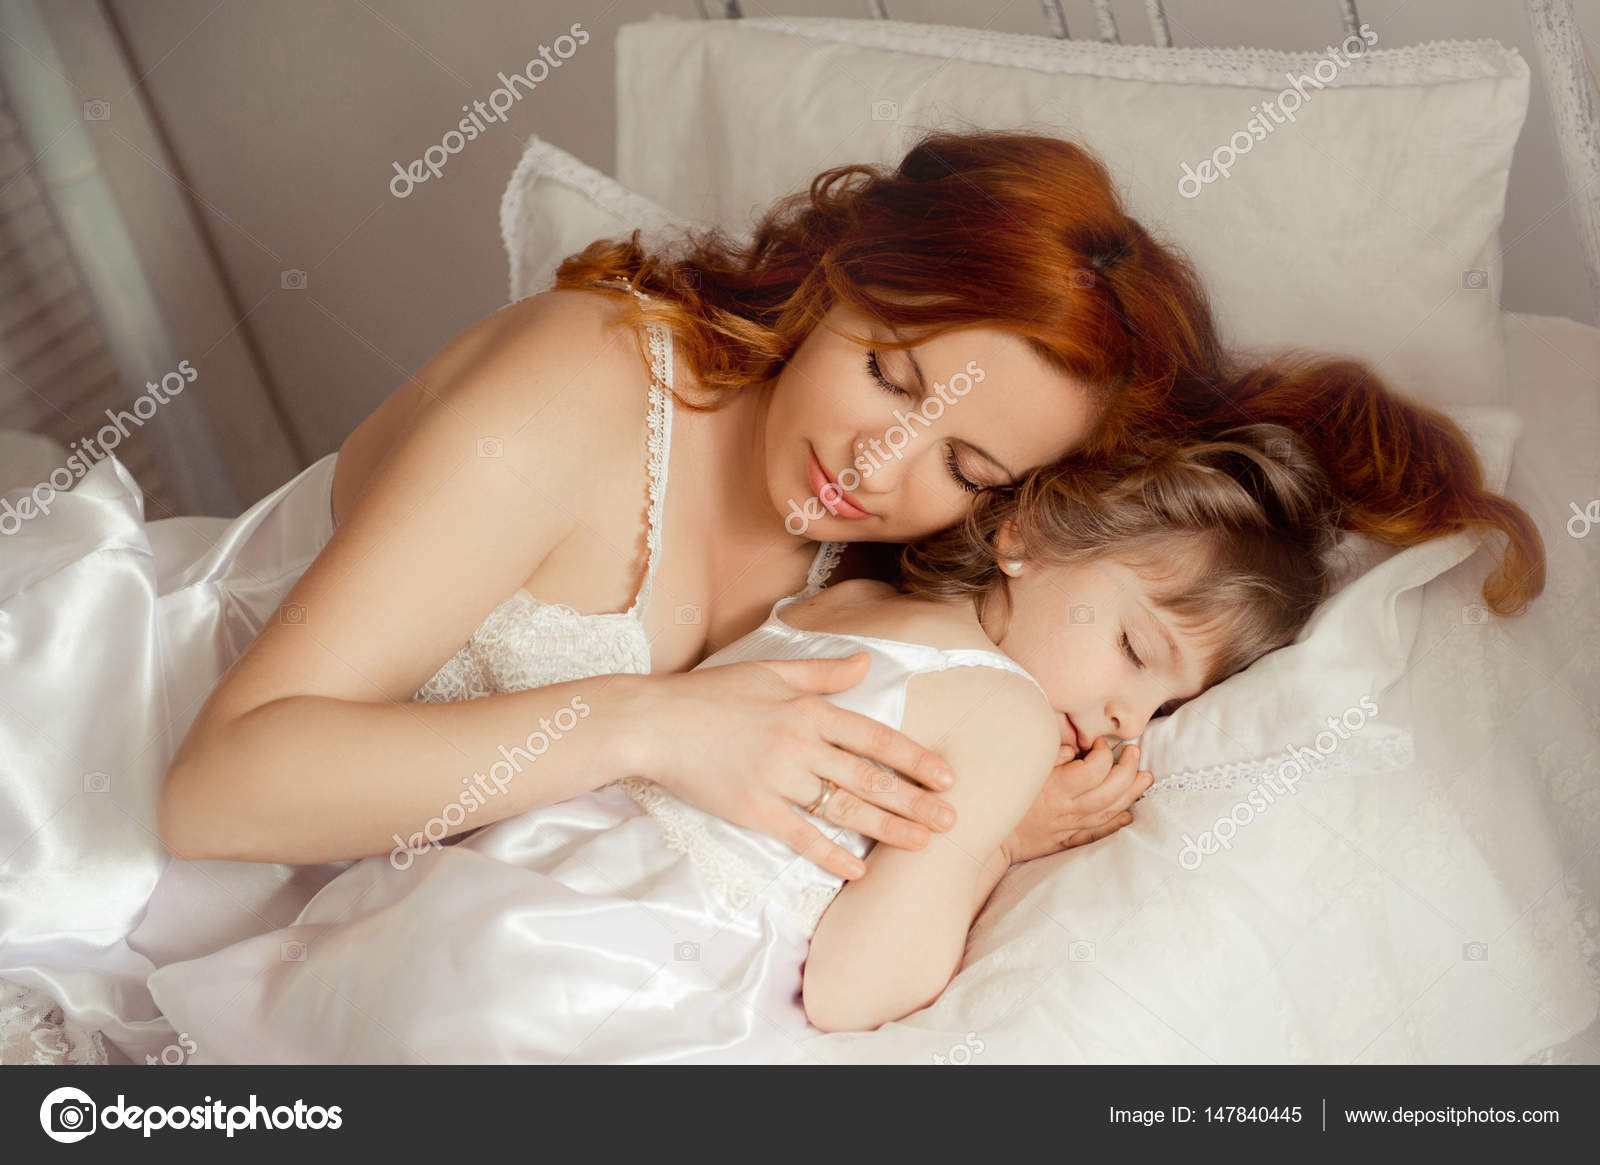 In bed next to mom